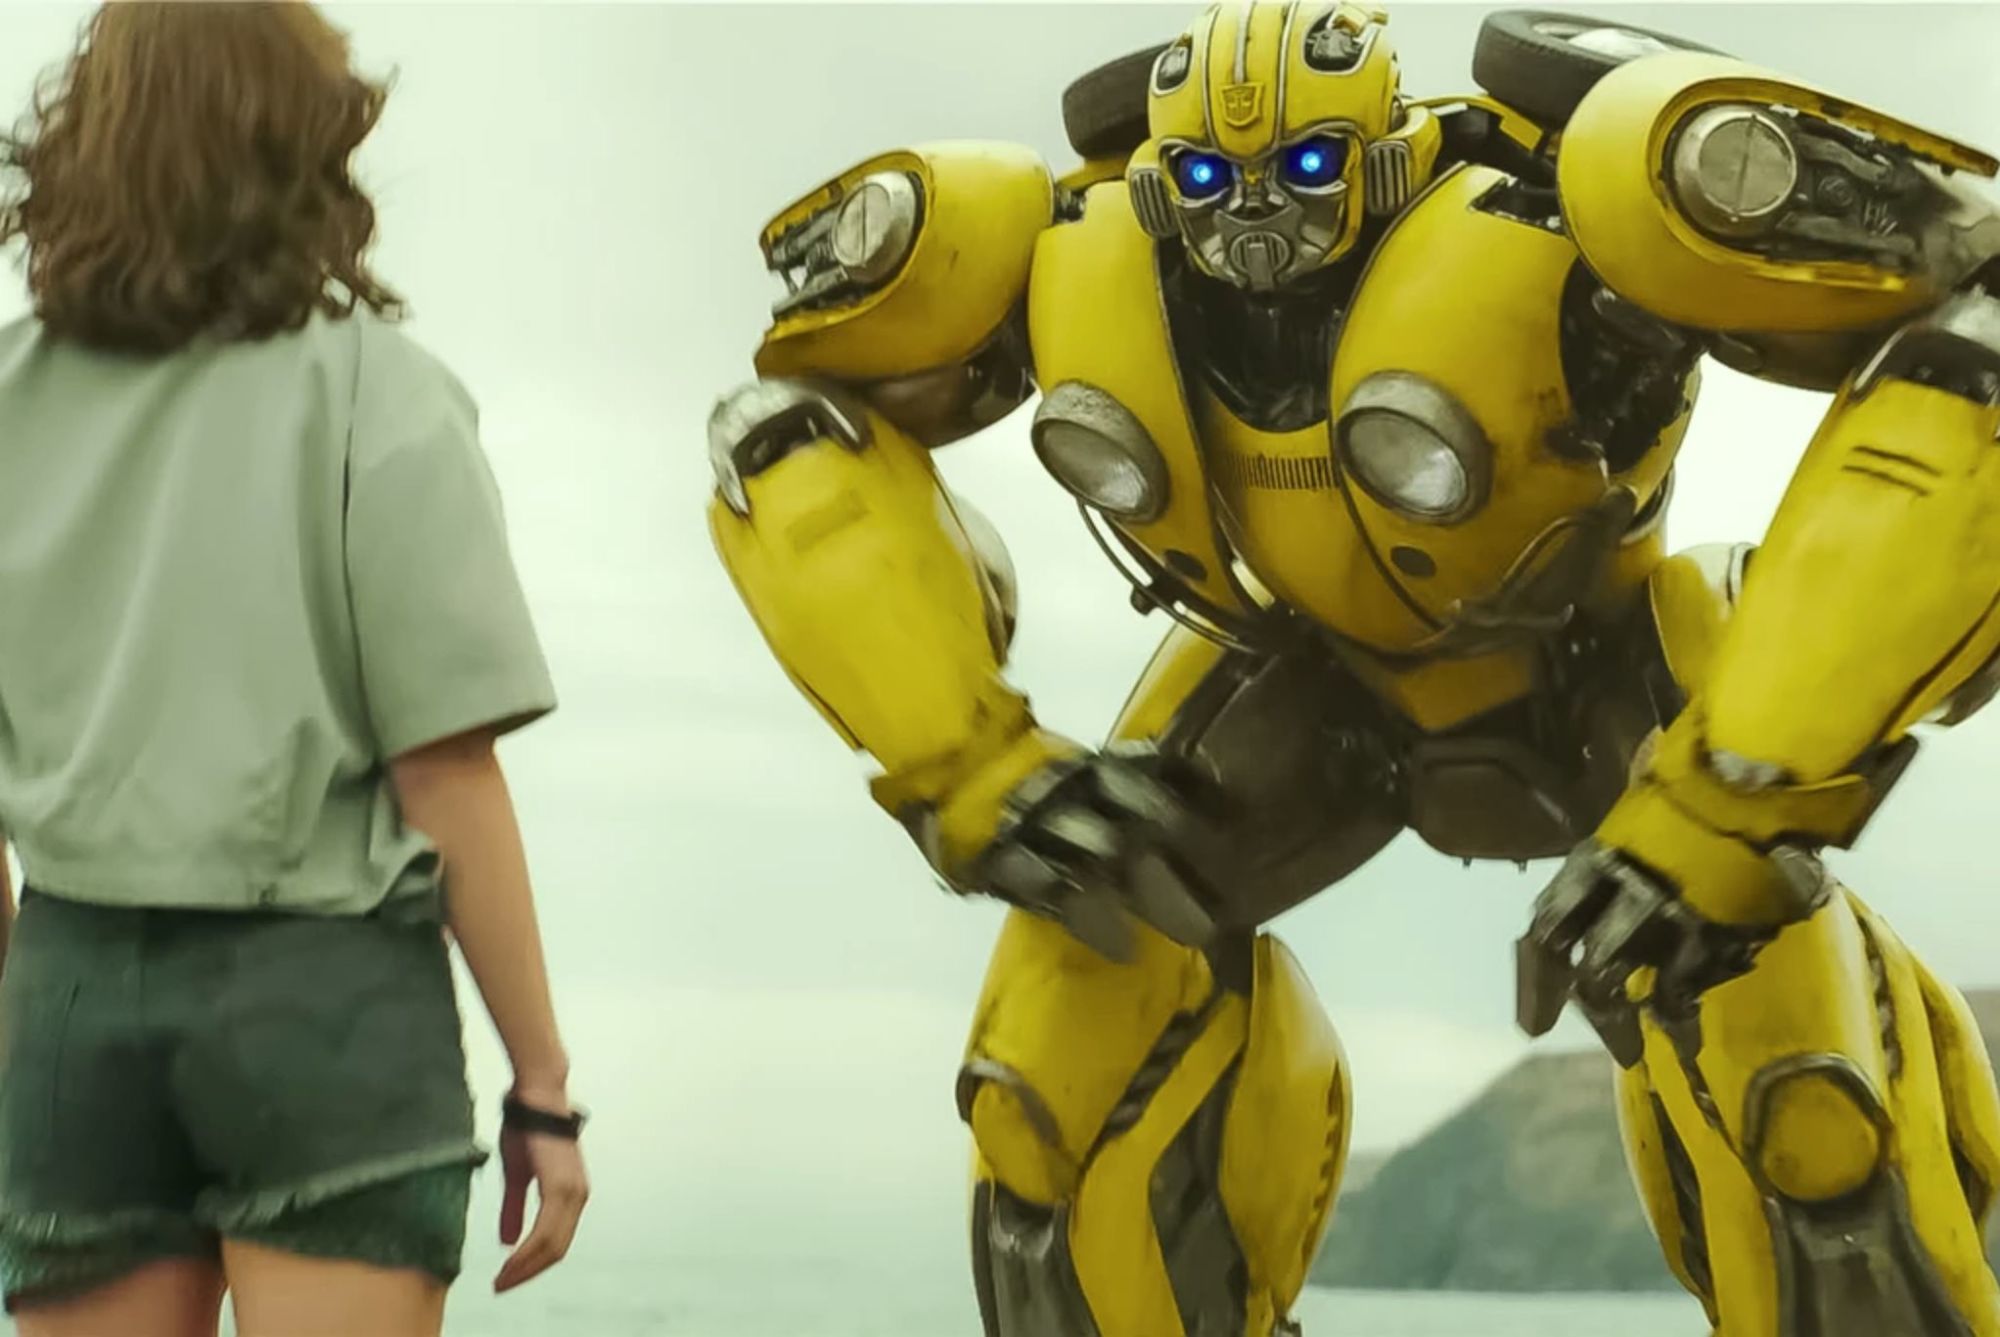 The Optimus Prime Movie Isn't Happening, New Details on Bumblebee 2